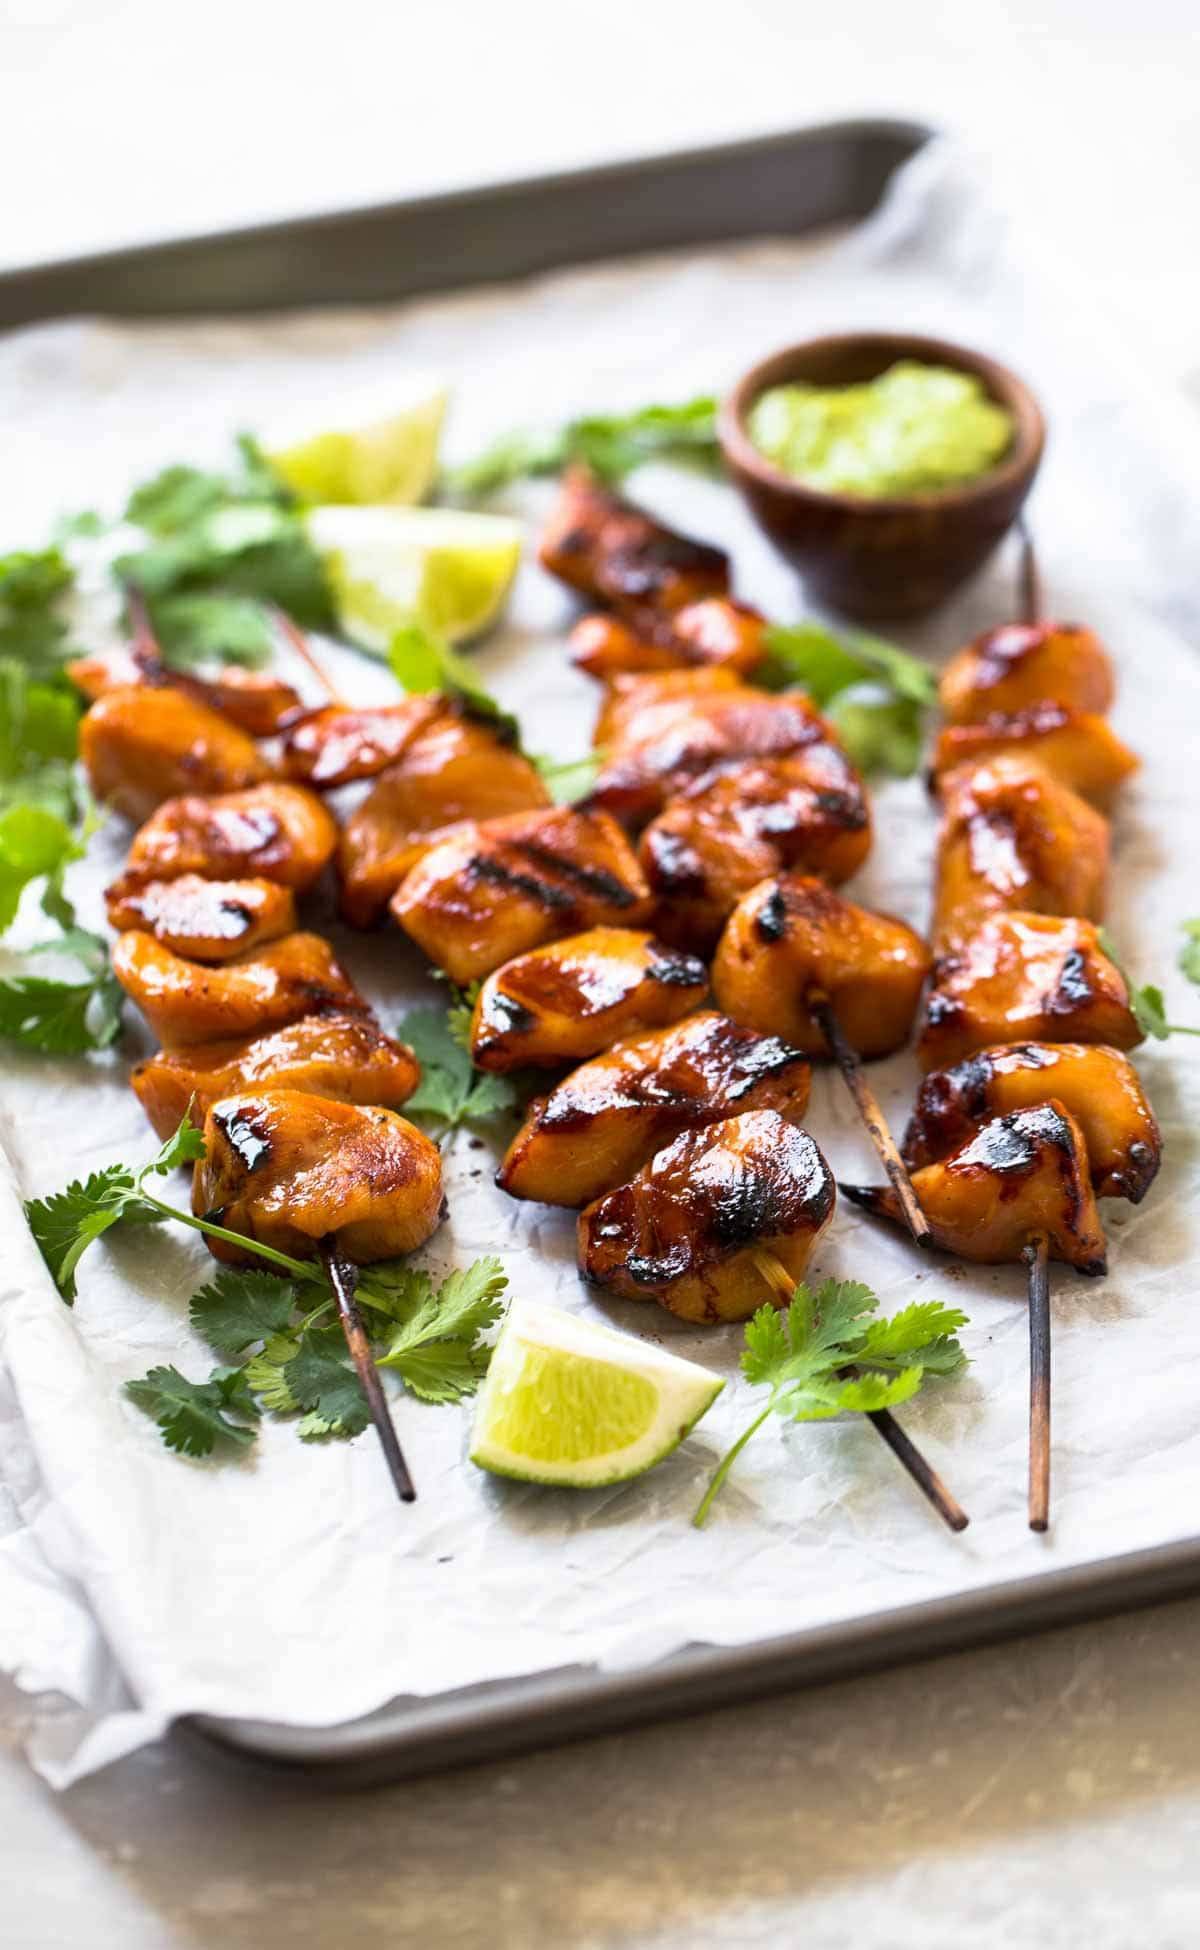 Grilled chicken on skewers.